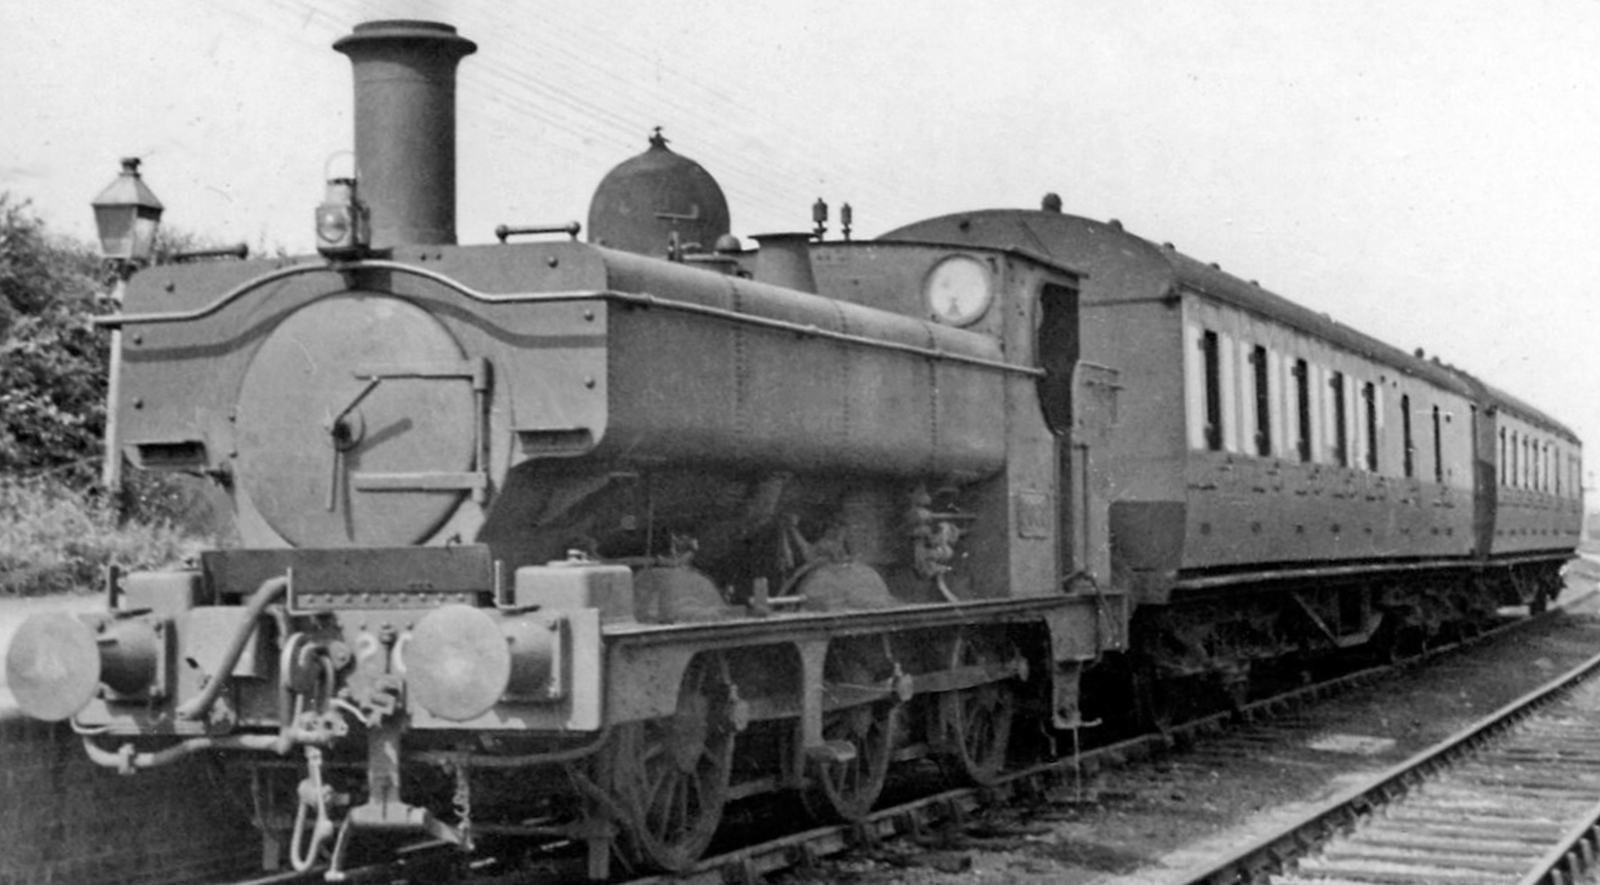 No. 2080 with remote control in front of an “auto-train” in July 1948 at Berkeley Road station, Gloucestershire